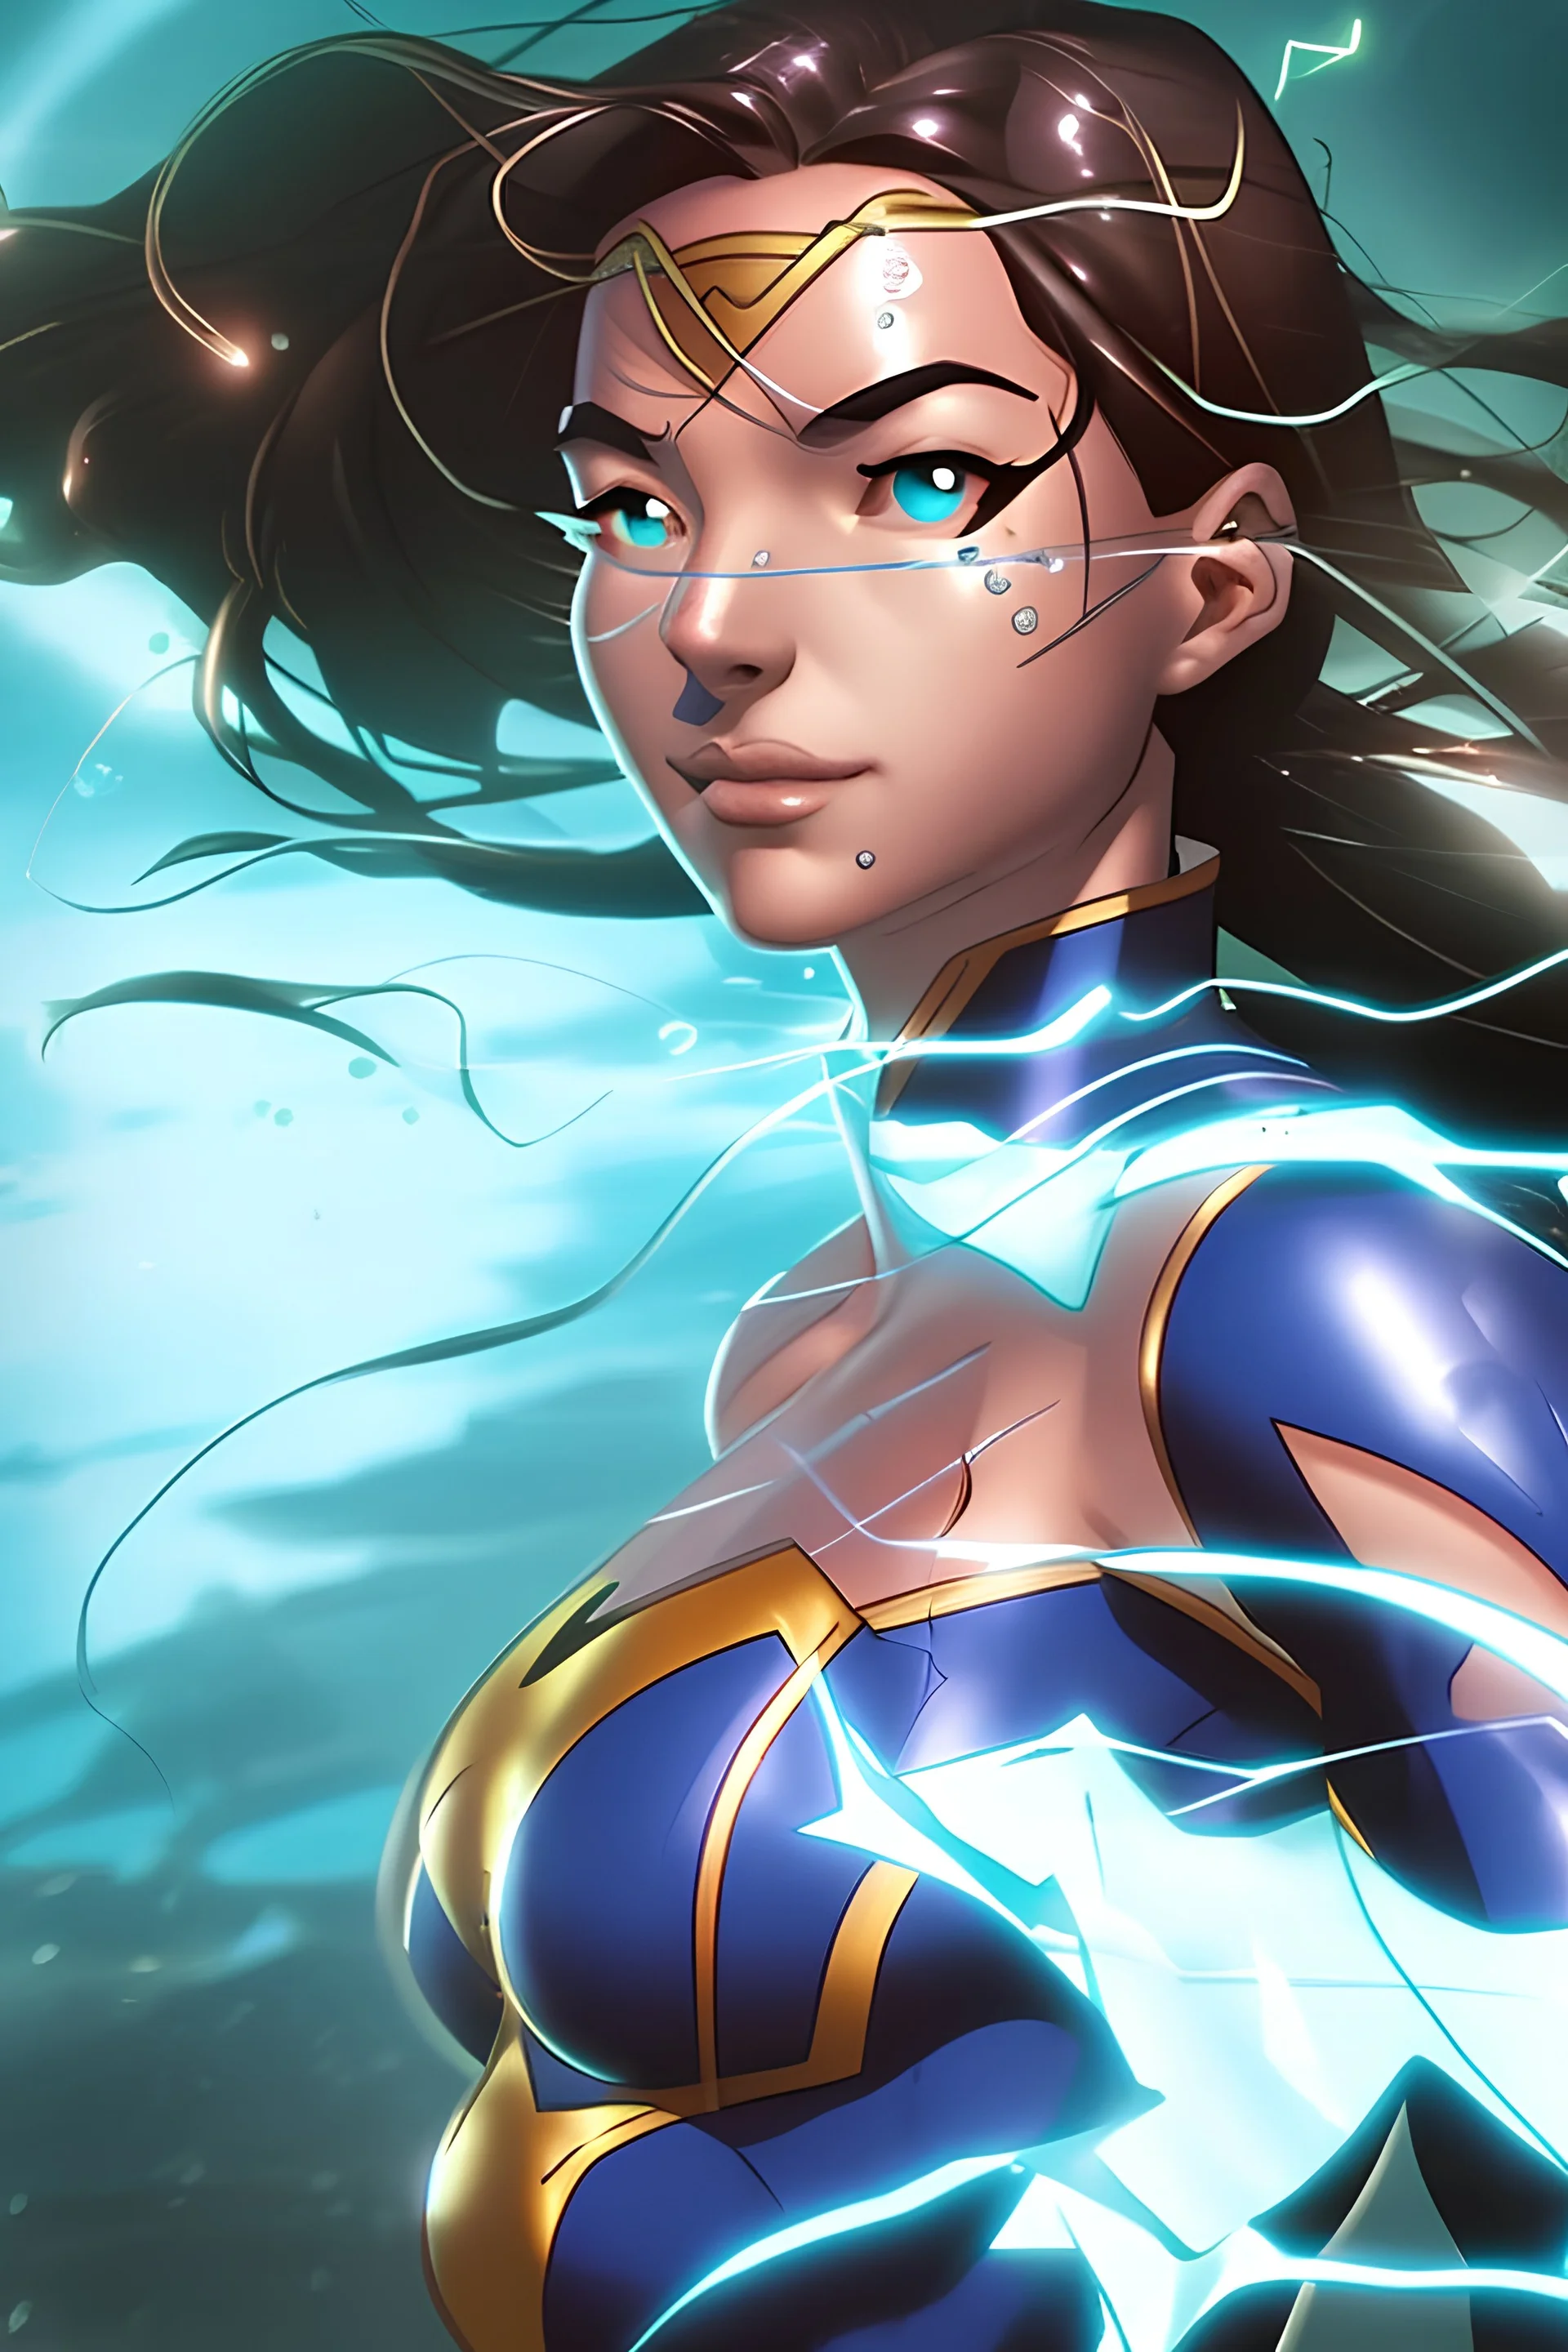 A female superhero with water powers close up